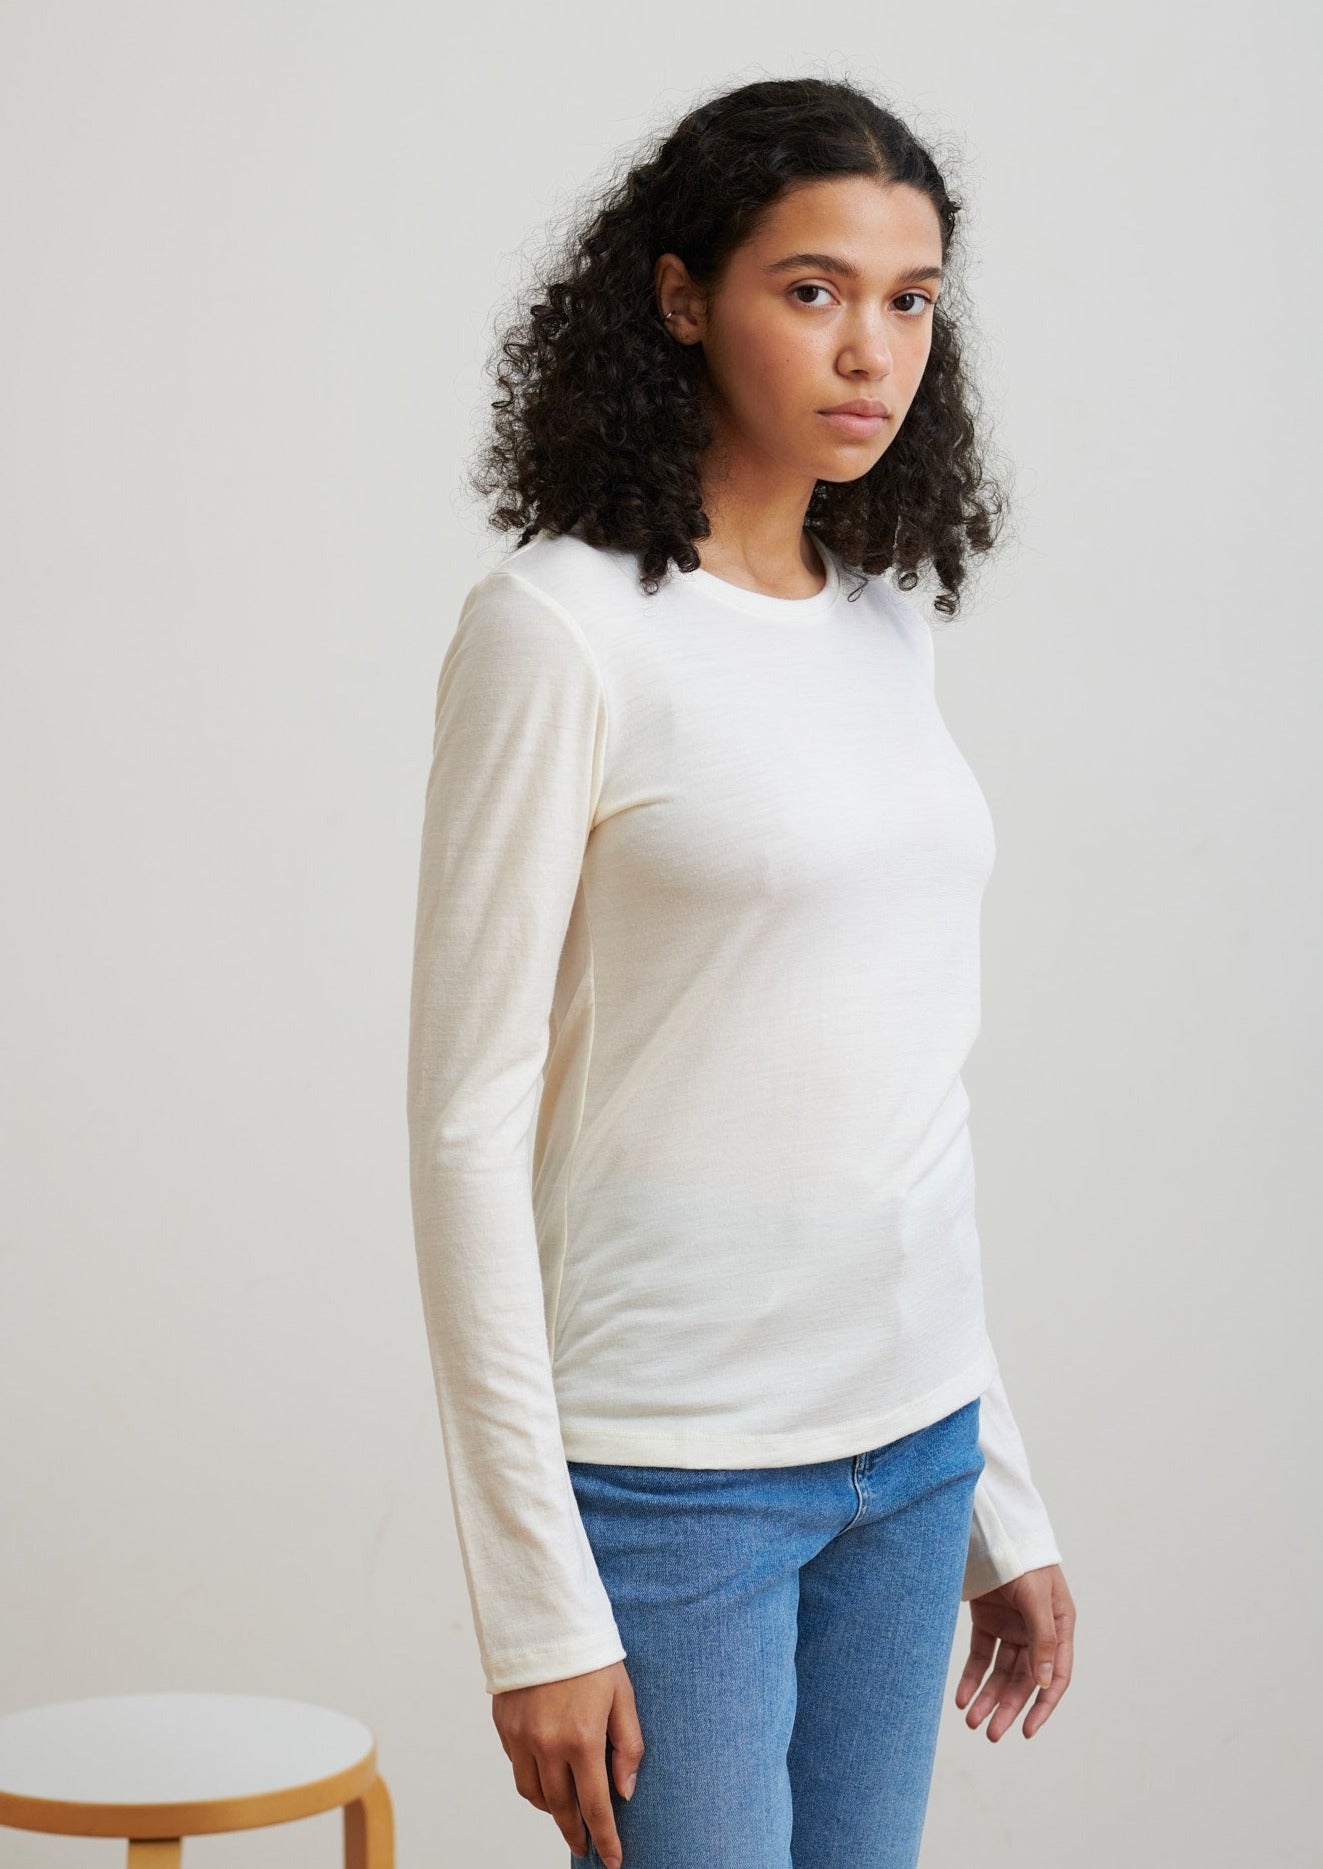 A classic long-sleeve crew neck, this layering piece in ethical wool is soft and lightweight and designed to wear all seasons. 